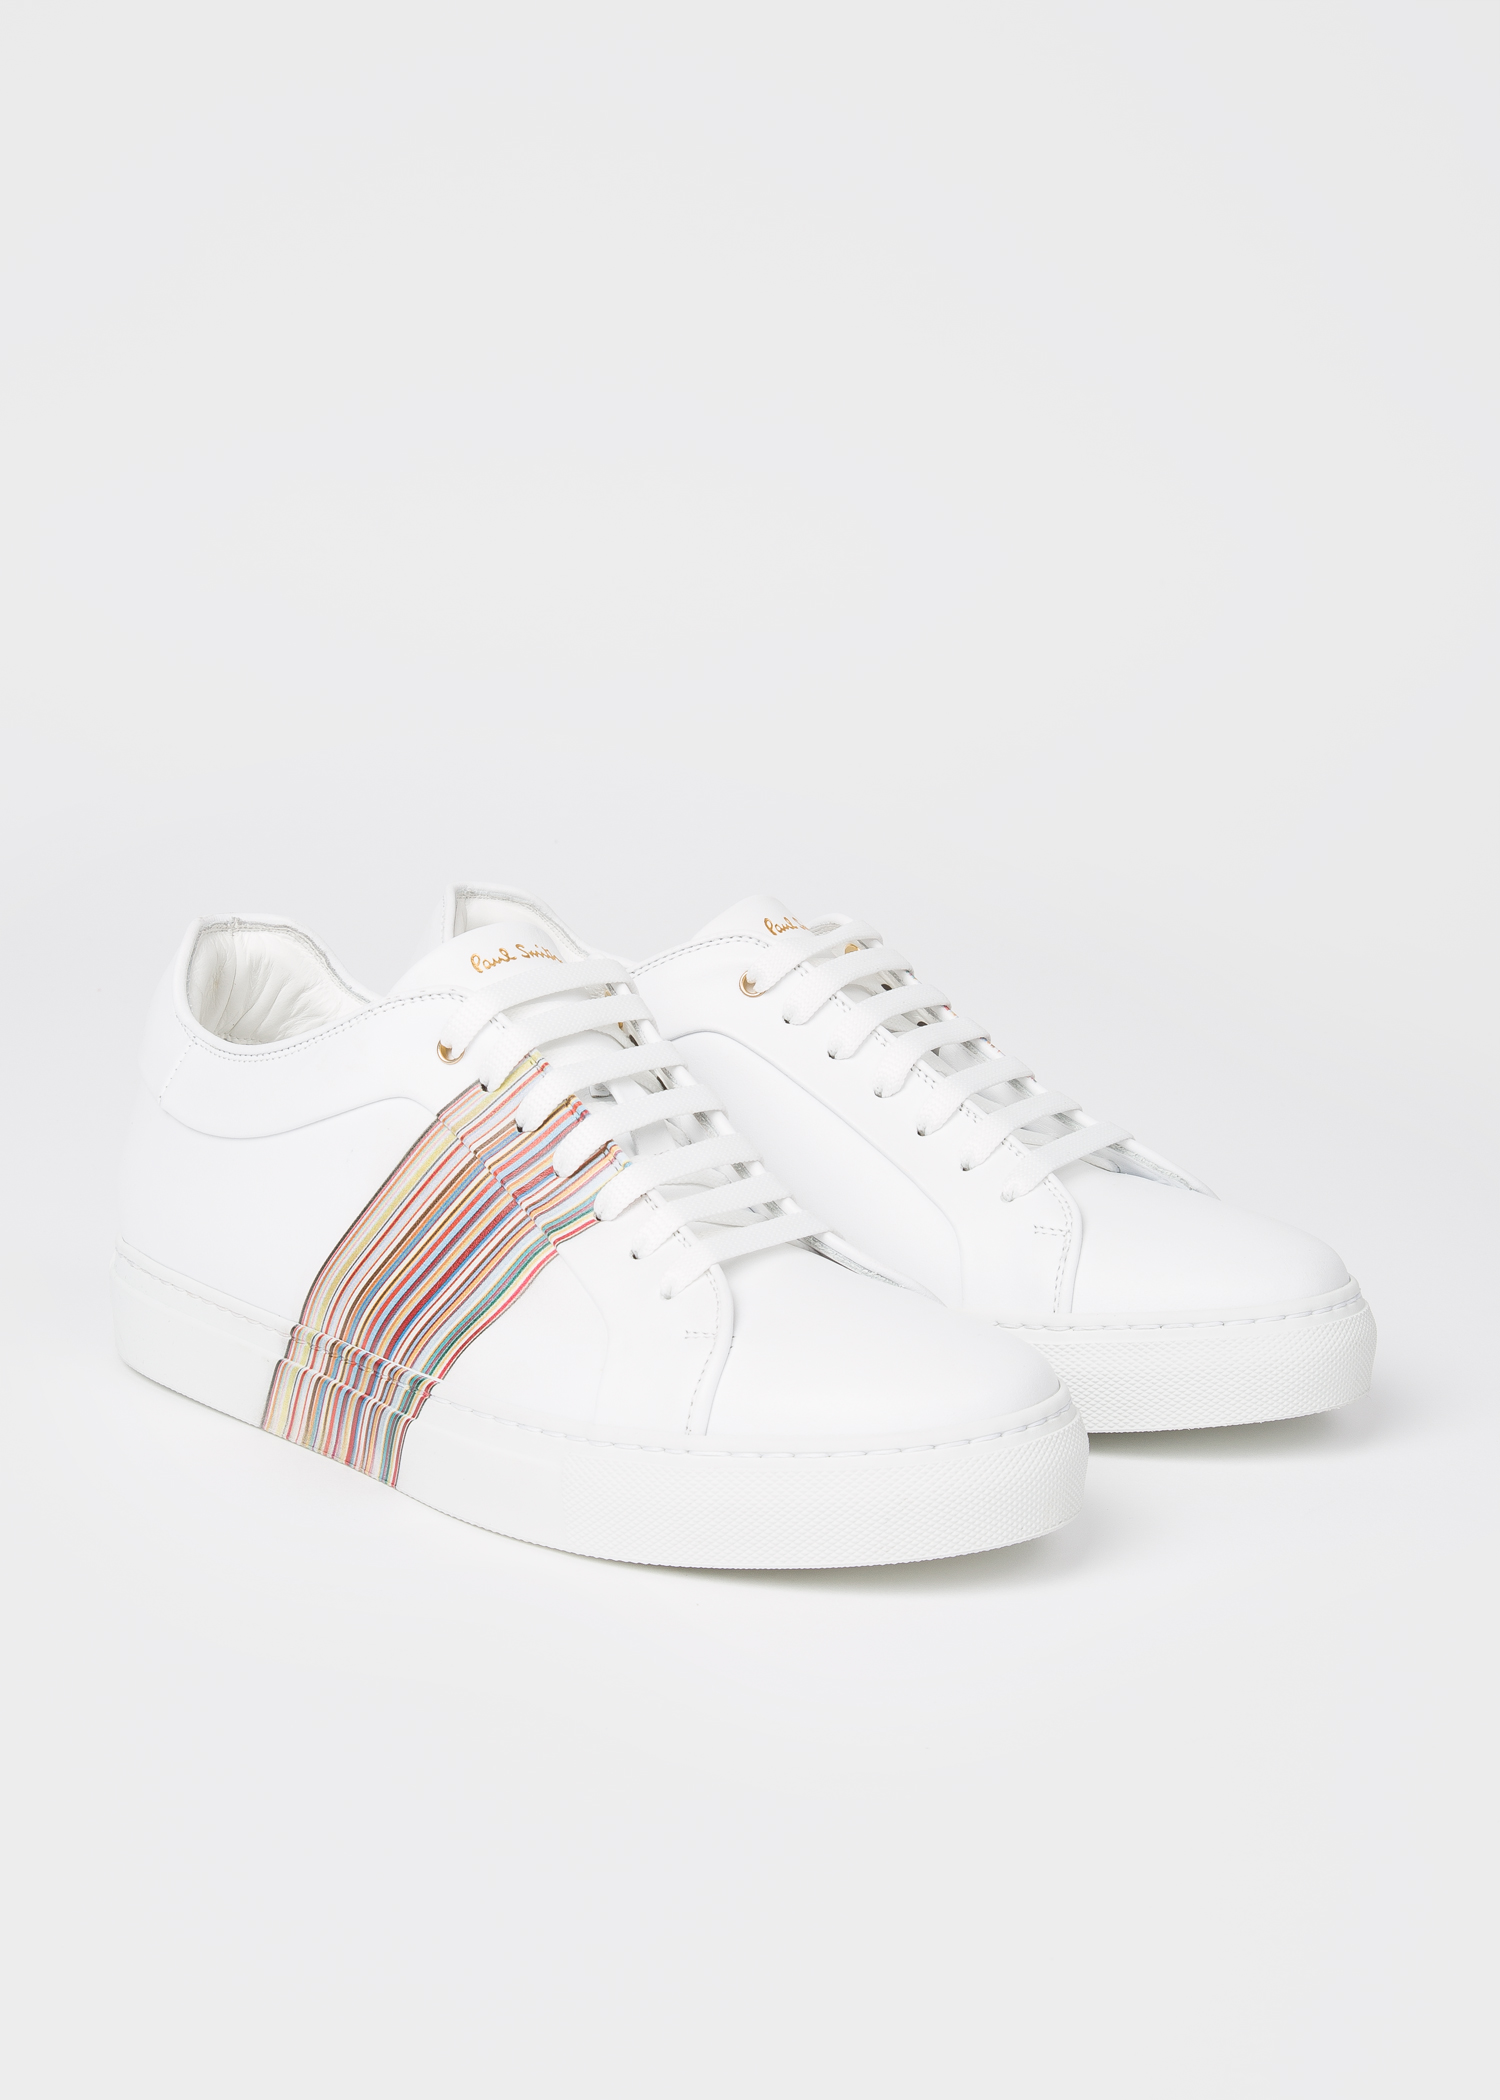 Angled view - Men's White Leather 'Basso' Trainers With 'Signature Stripe' Panel Paul Smith